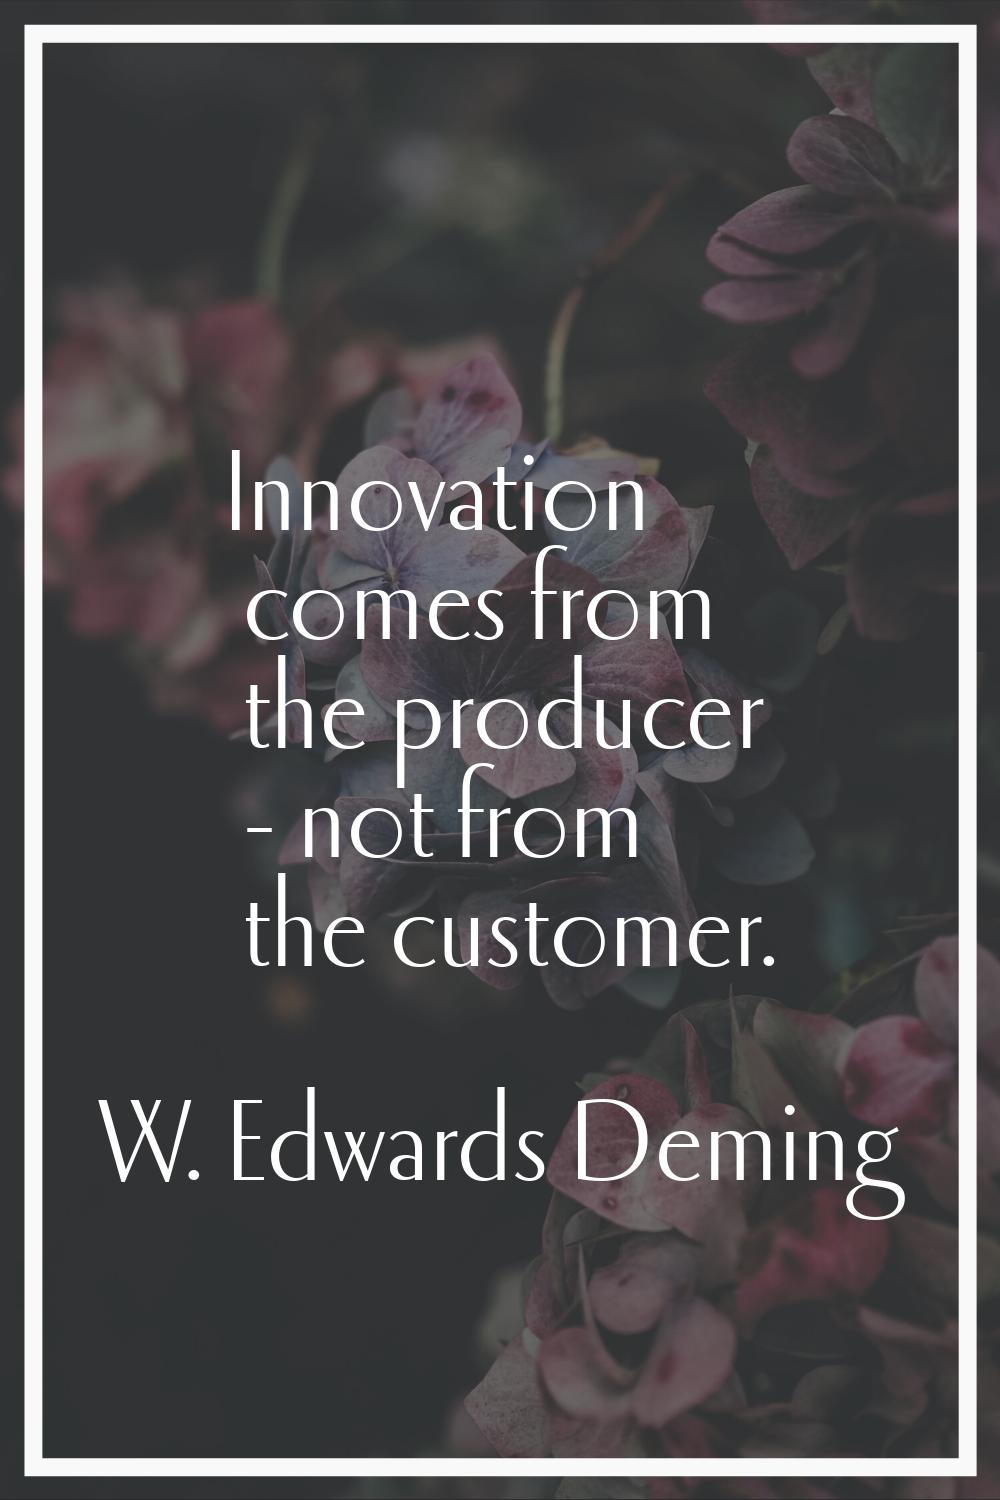 Innovation comes from the producer - not from the customer.